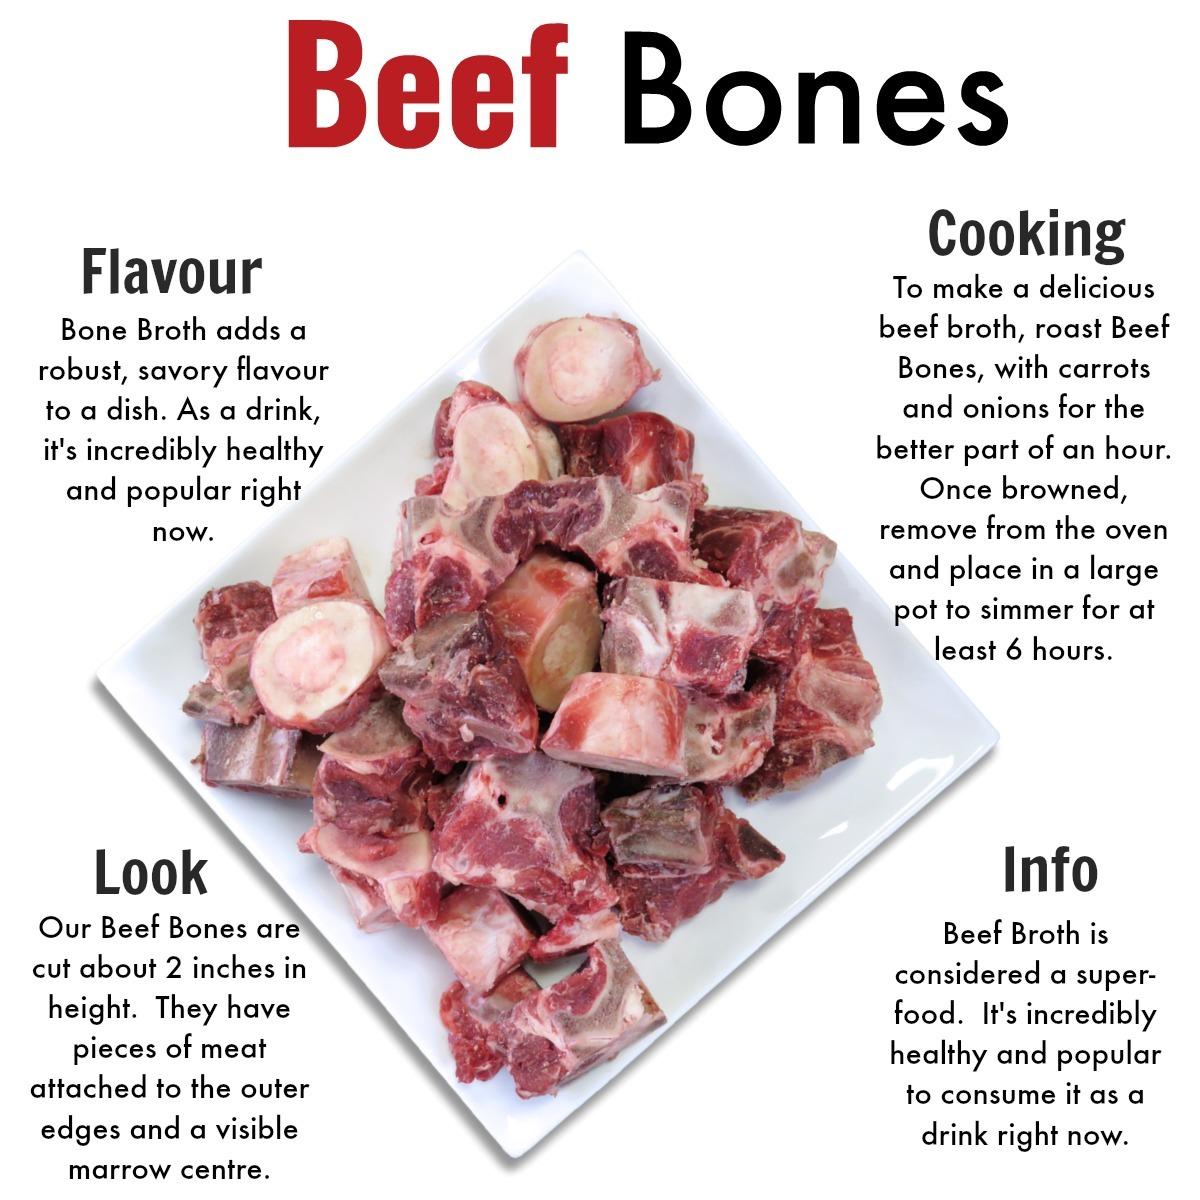 Affordable grass-fed beef delivery near me, steaks, ground beef and more - Nutrafams - Beef Bones 2